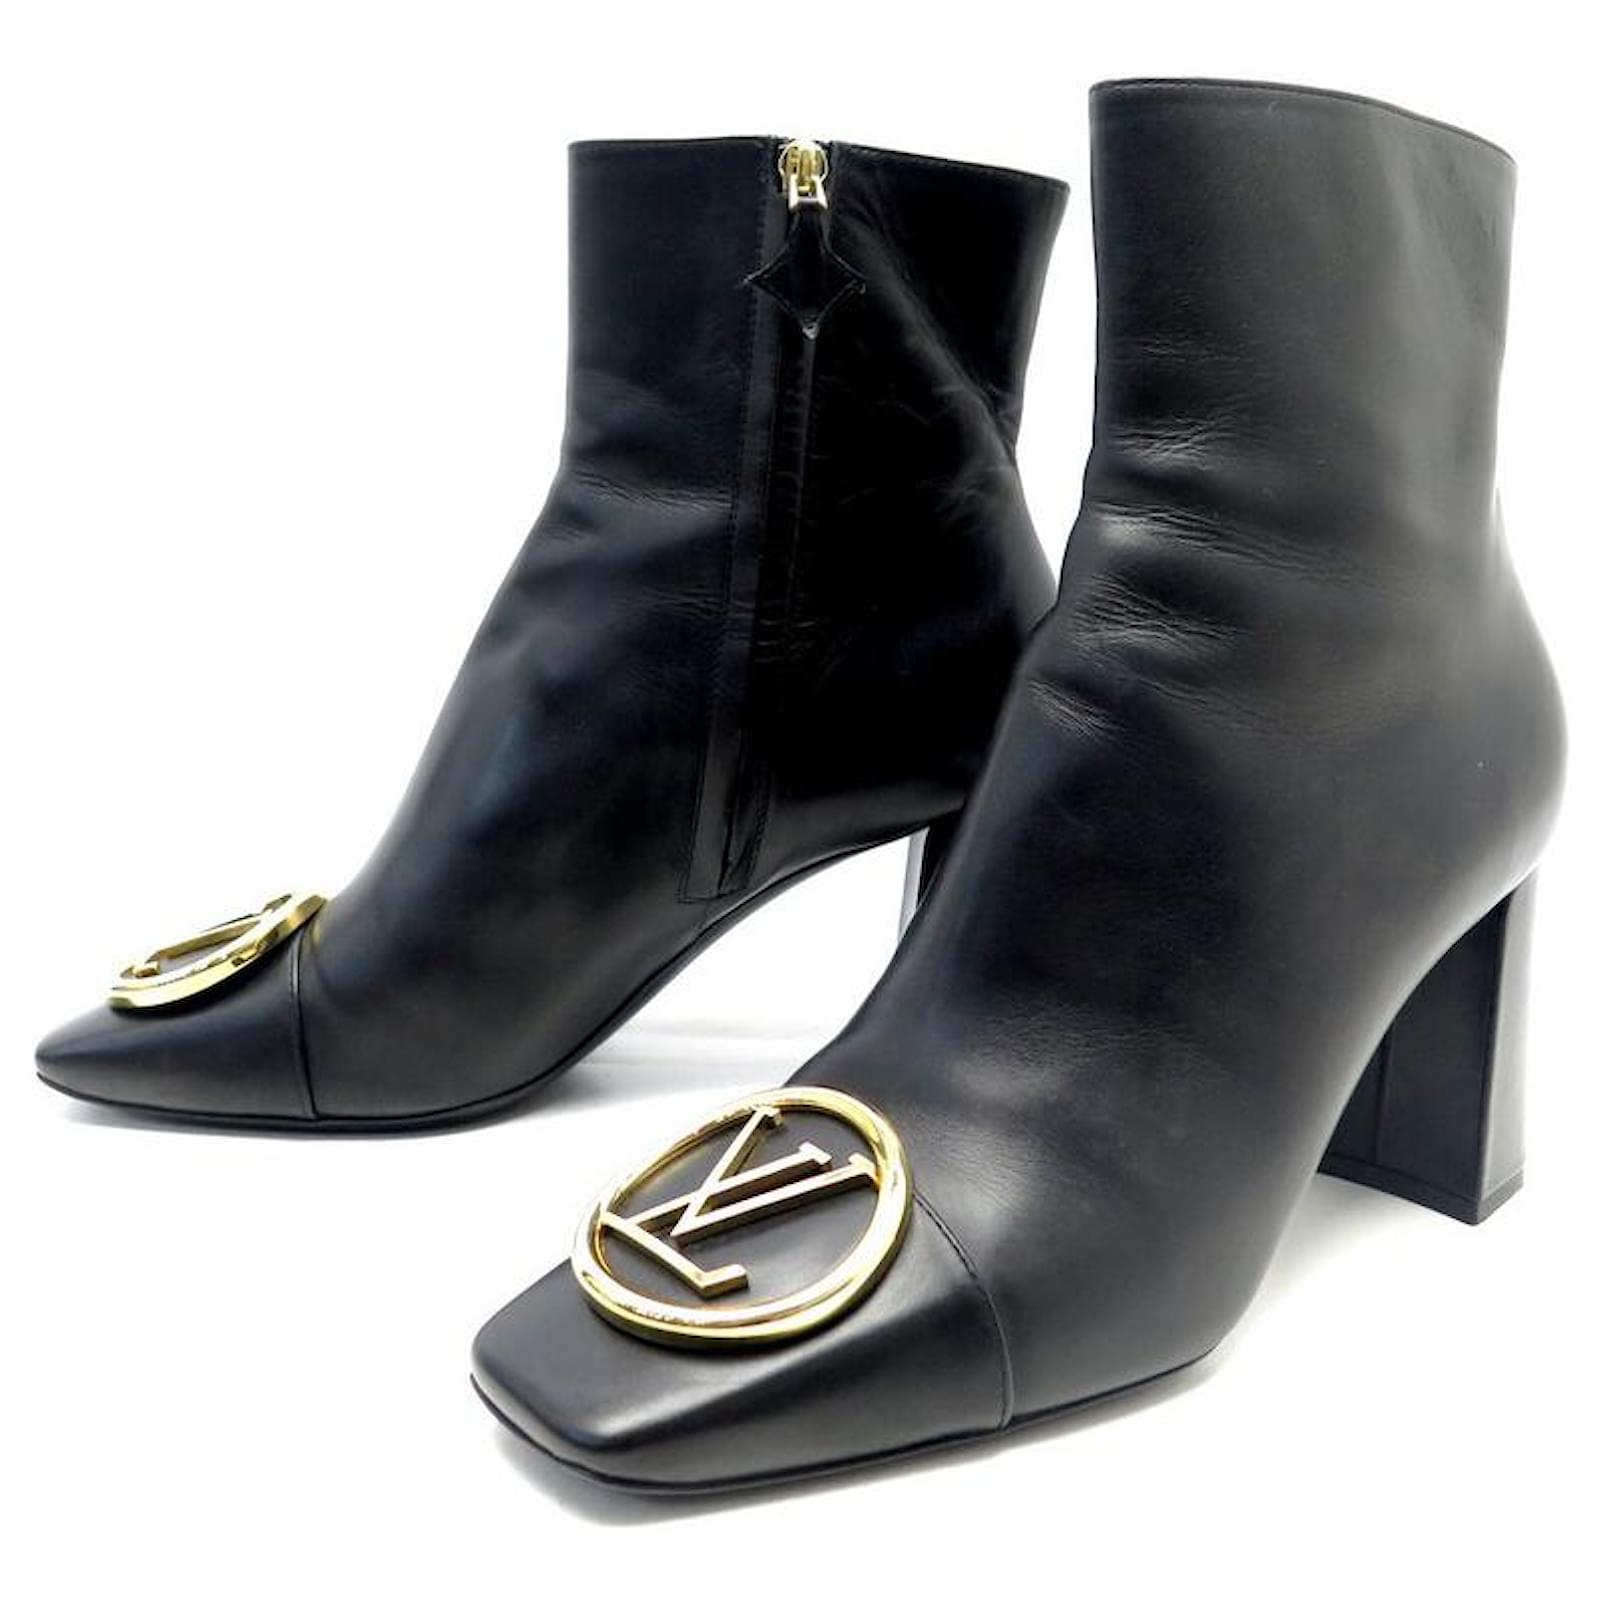 LOUIS VUITTON MADELEINE BOOTS SHOES 41 BLACK LEATHER BOOTS